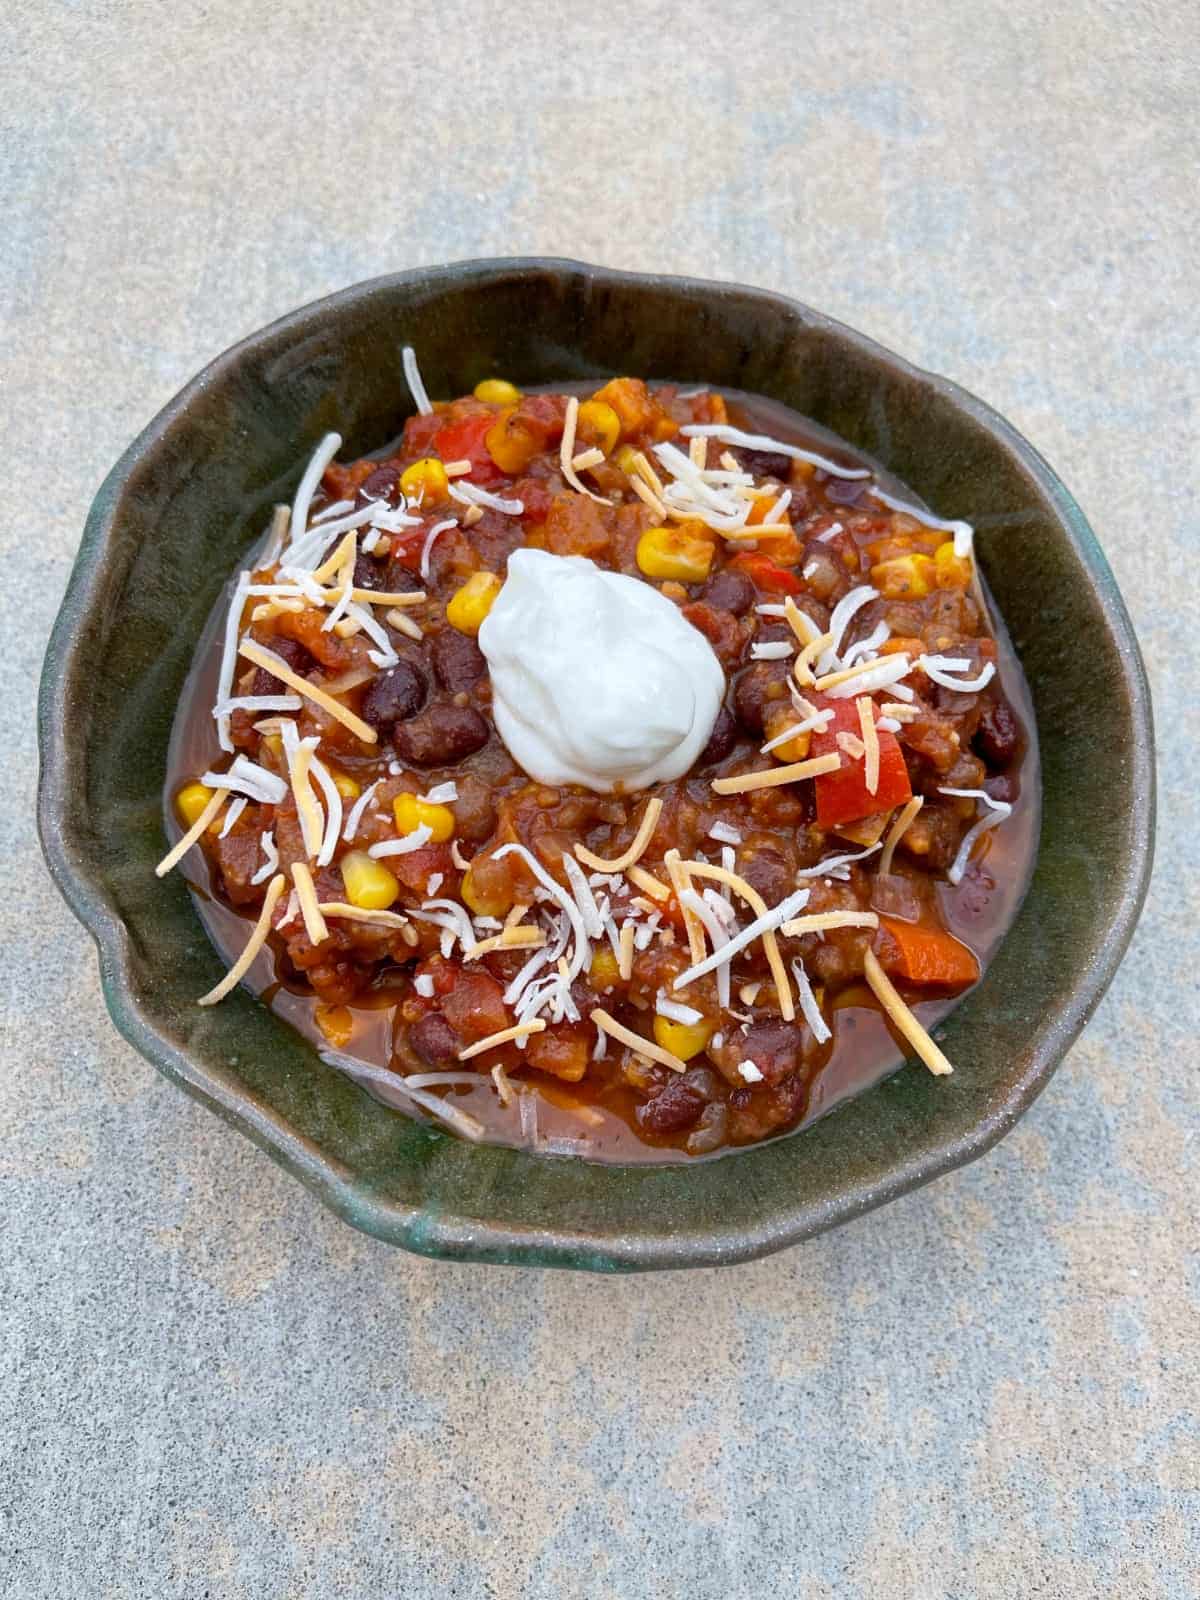 Vegetarian chili with black beans and sweet potatoes topped with shredded cheese and lite sour cream.